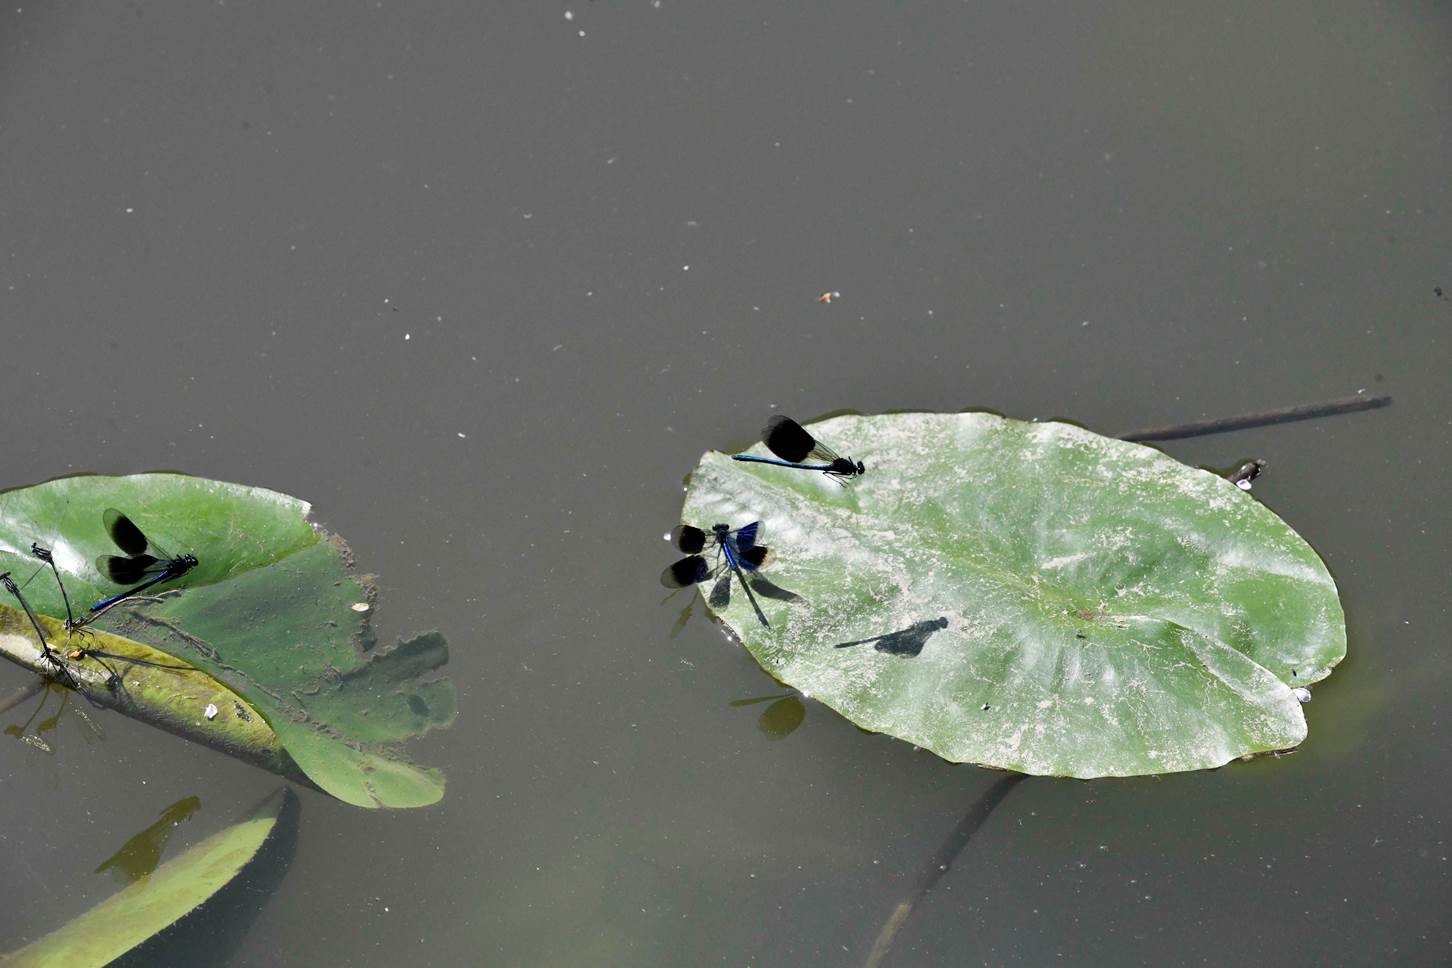 A dragonflies on a lily pad

Description automatically generated